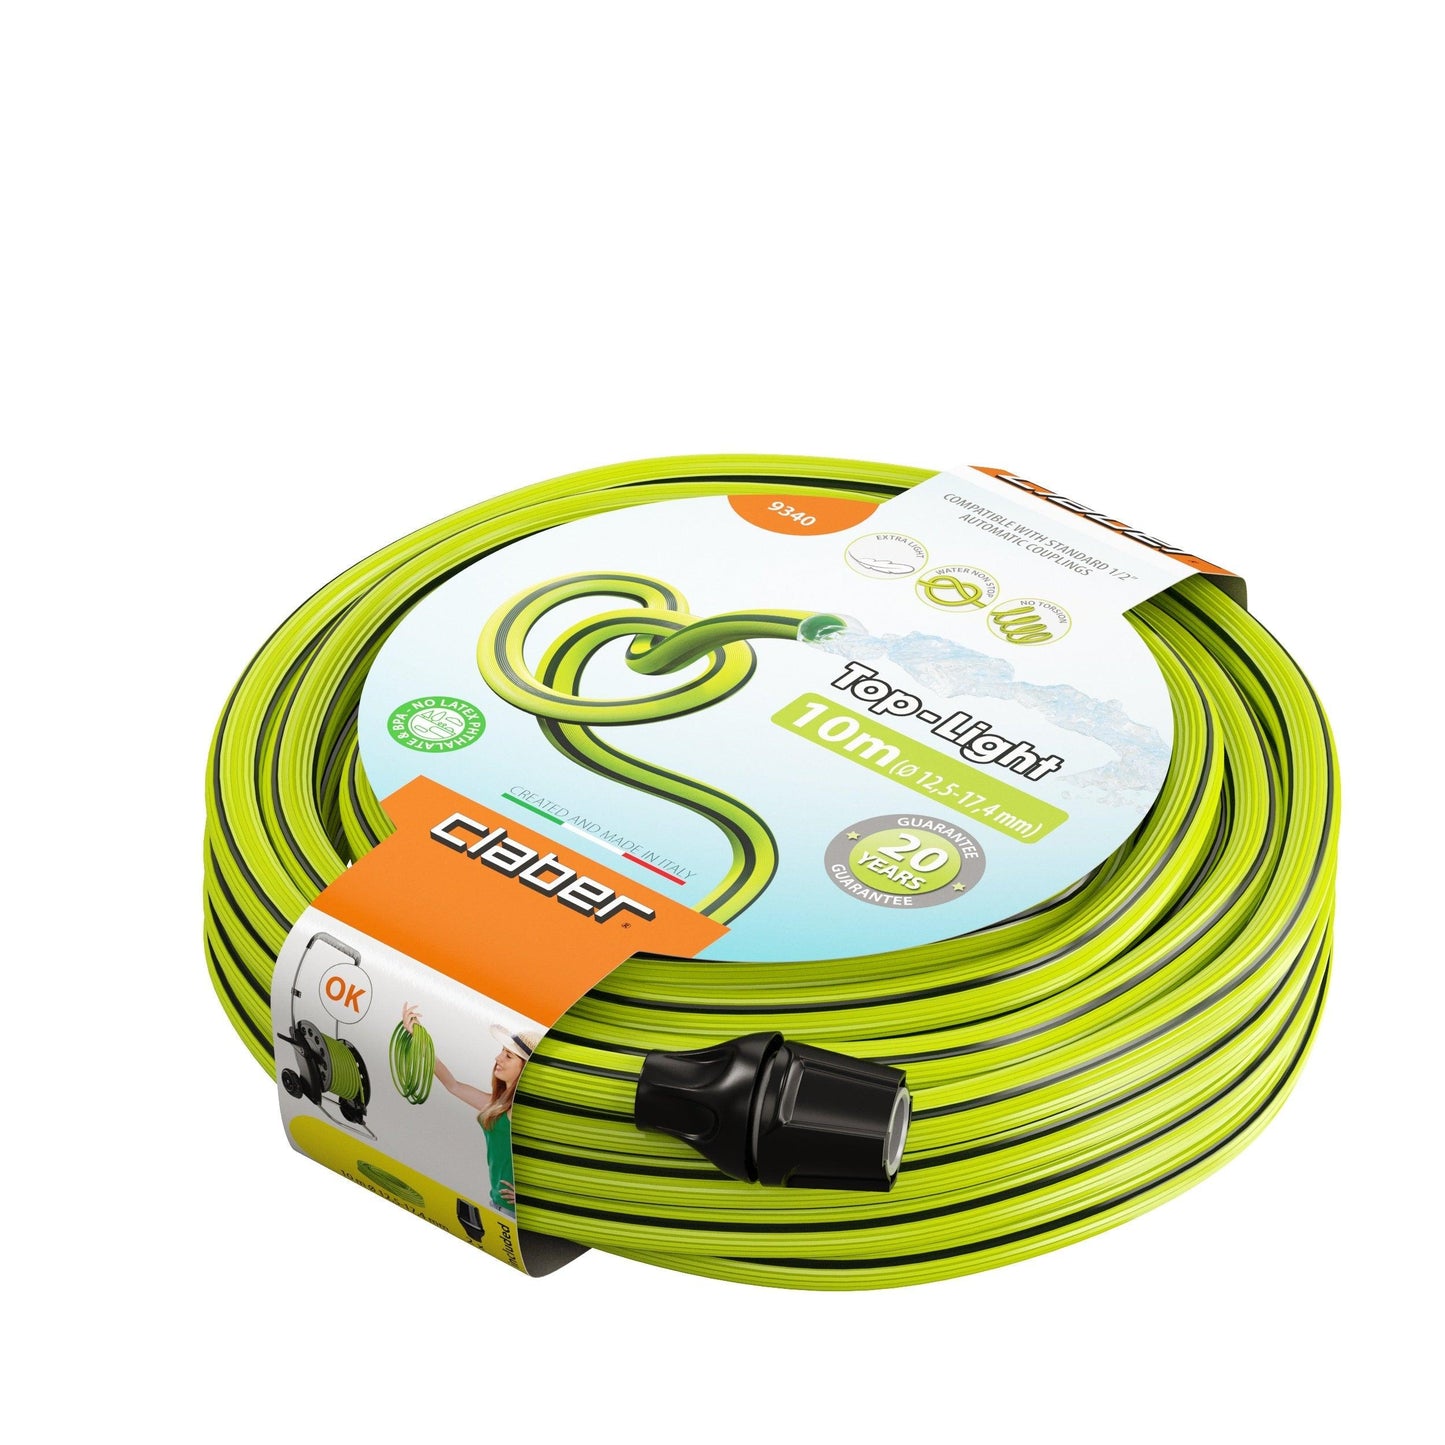 CLABER ½” Top-Light Lightweight Hose 10m With Connectors - Premium Garden Hose from CLABER - Just R 600! Shop now at Securadeal